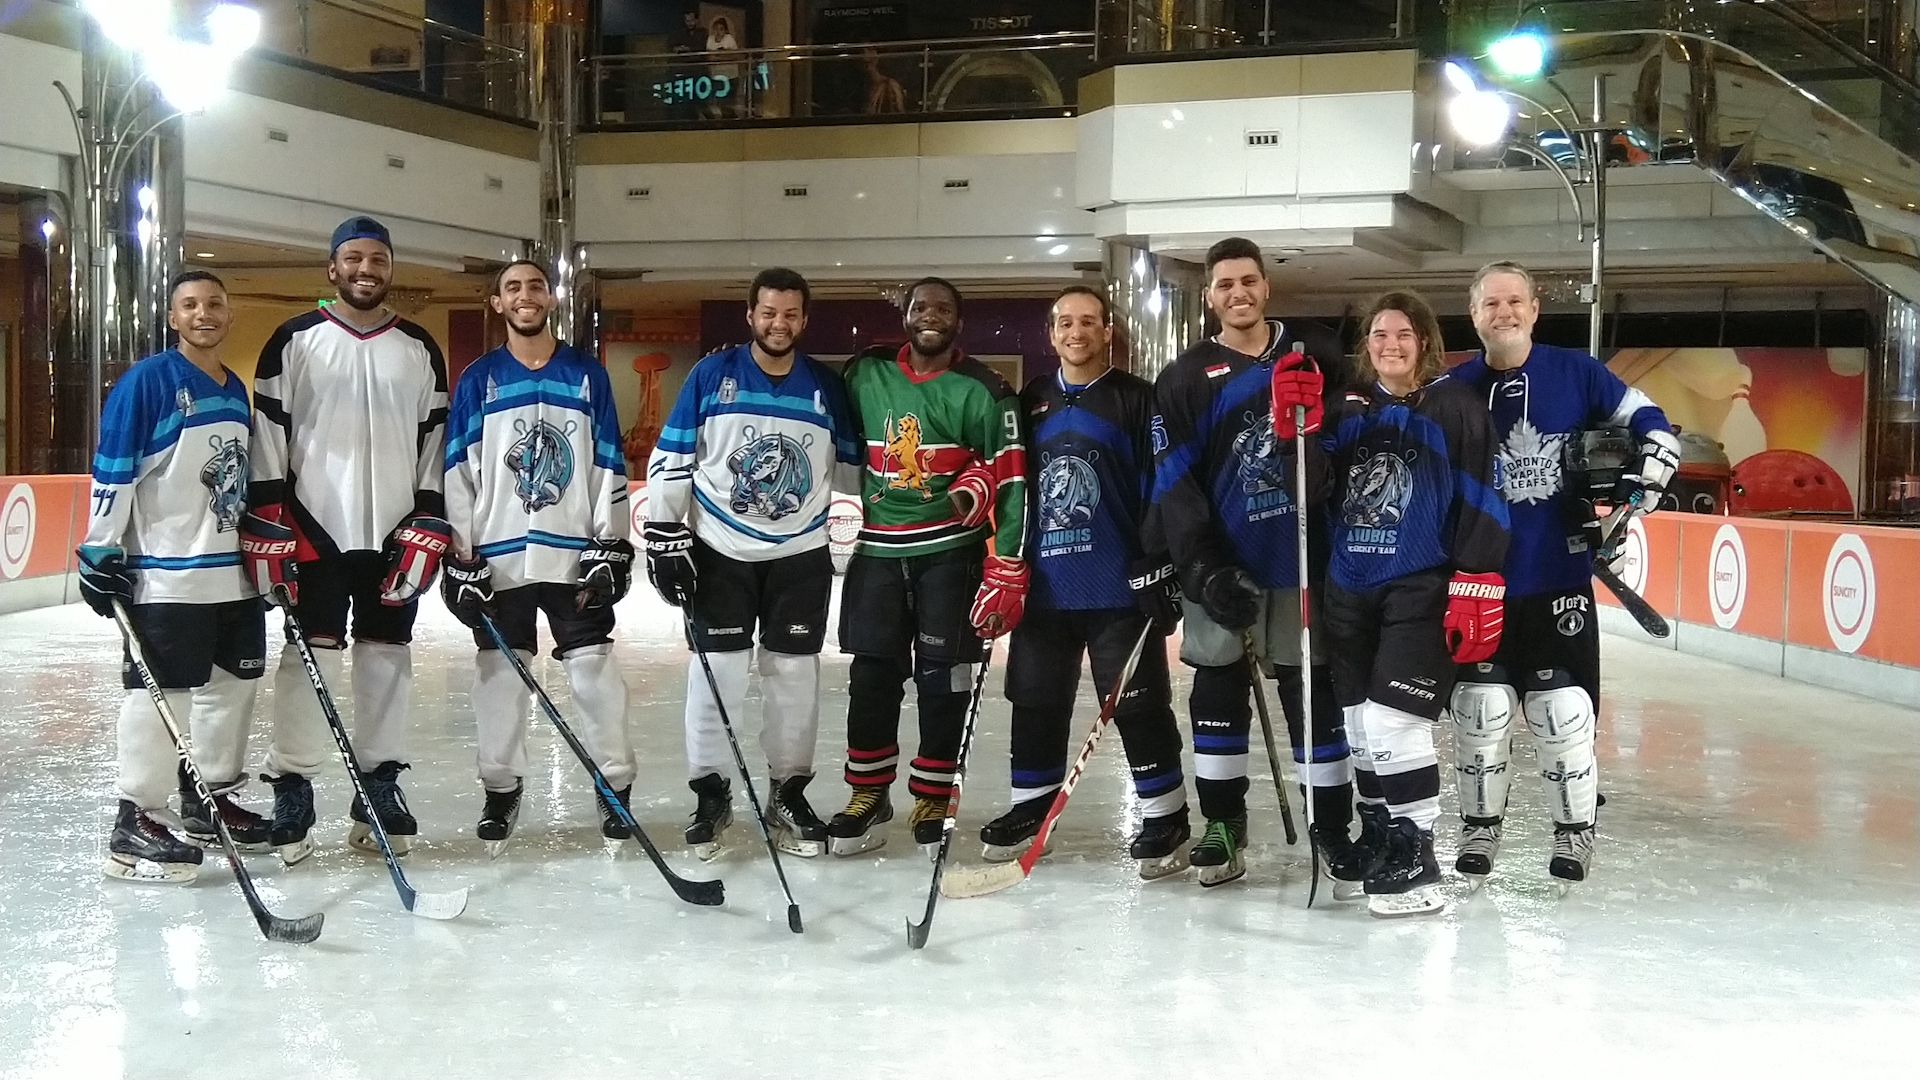 Robert (Ice Lions) and members of Anubis Ice Hockey Team (Egypt)